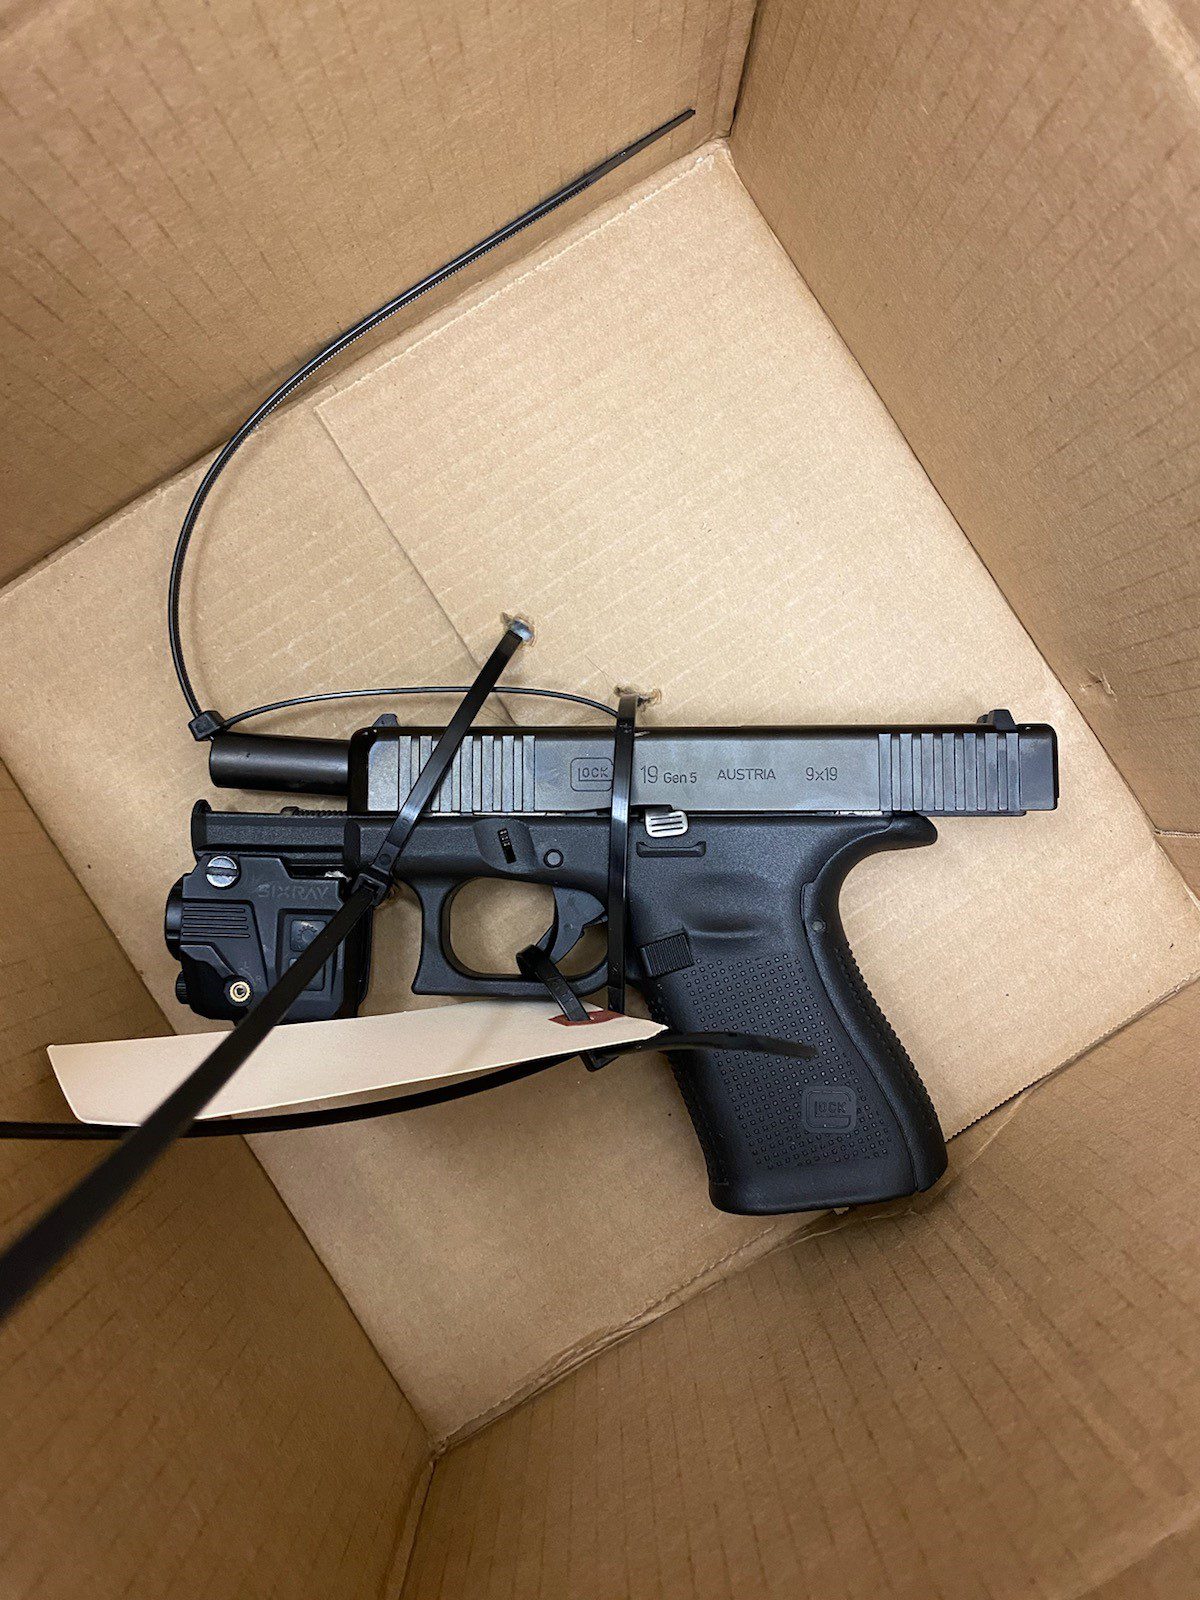 SPD Arrests Man, Recovers Gun After Shots Fired, Domestic Violence Incident in Delridge